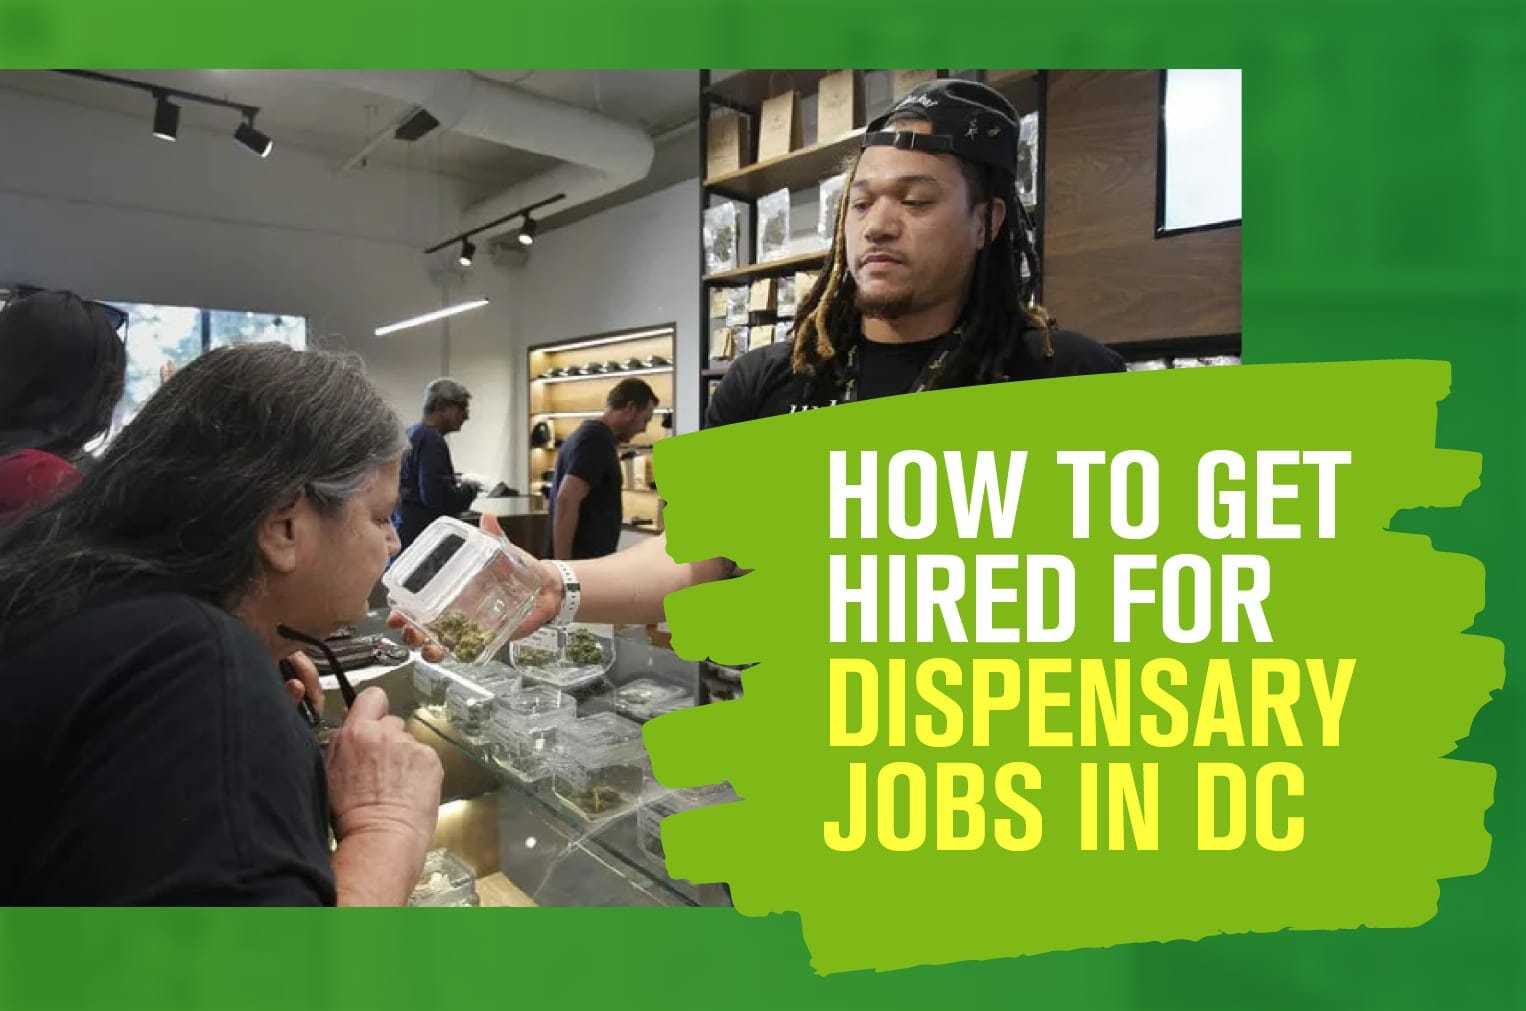 How to Get Hired for Dispensary Jobs in DC